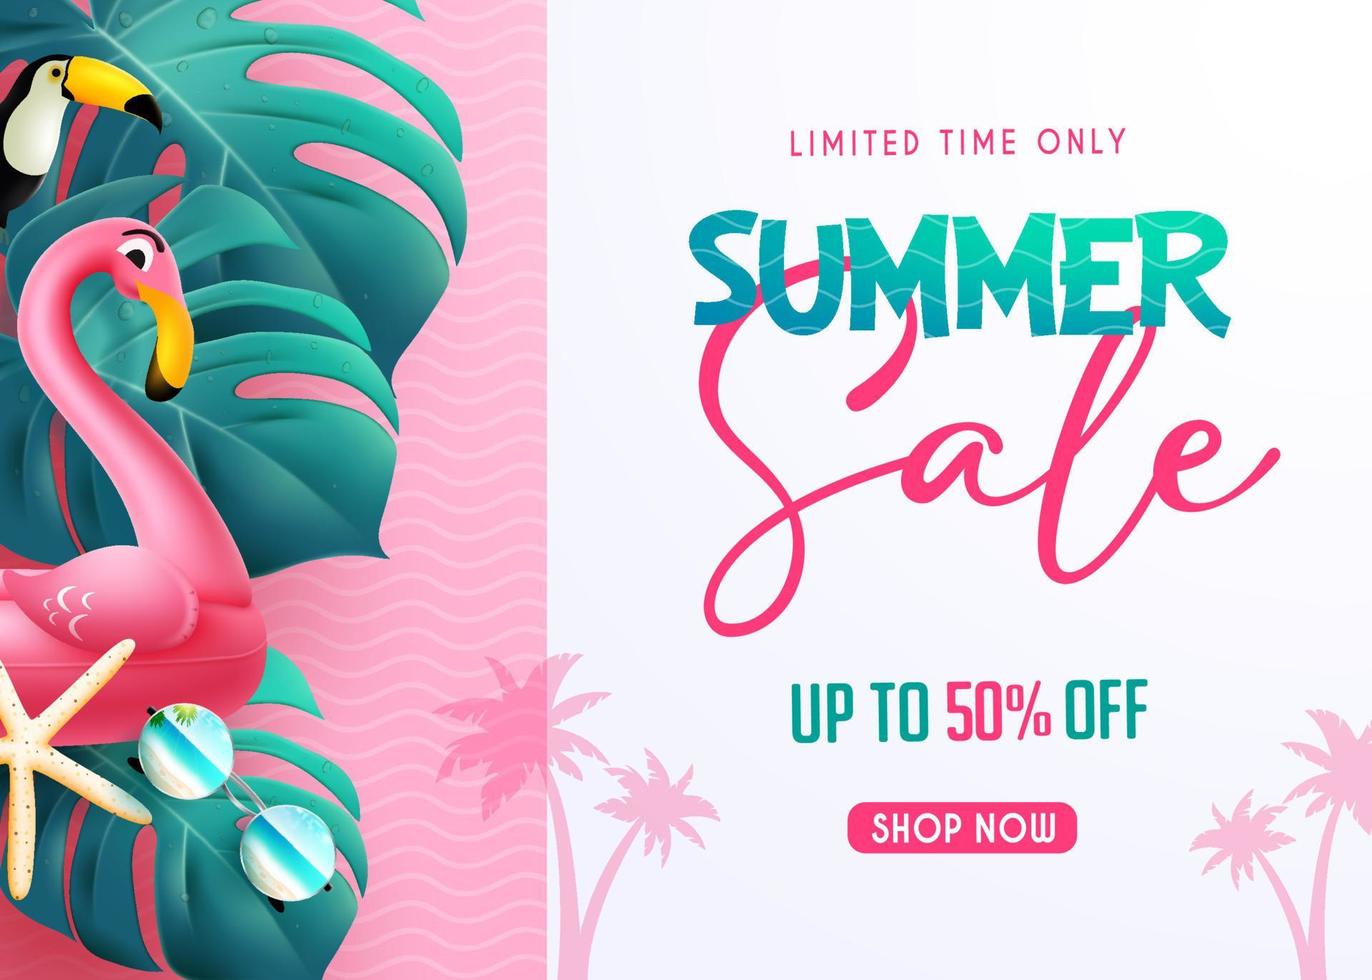 Summer sale vector banner design. Summer sale text discount promo in white template with flamingo and leaves element for seasonal shopping ads.